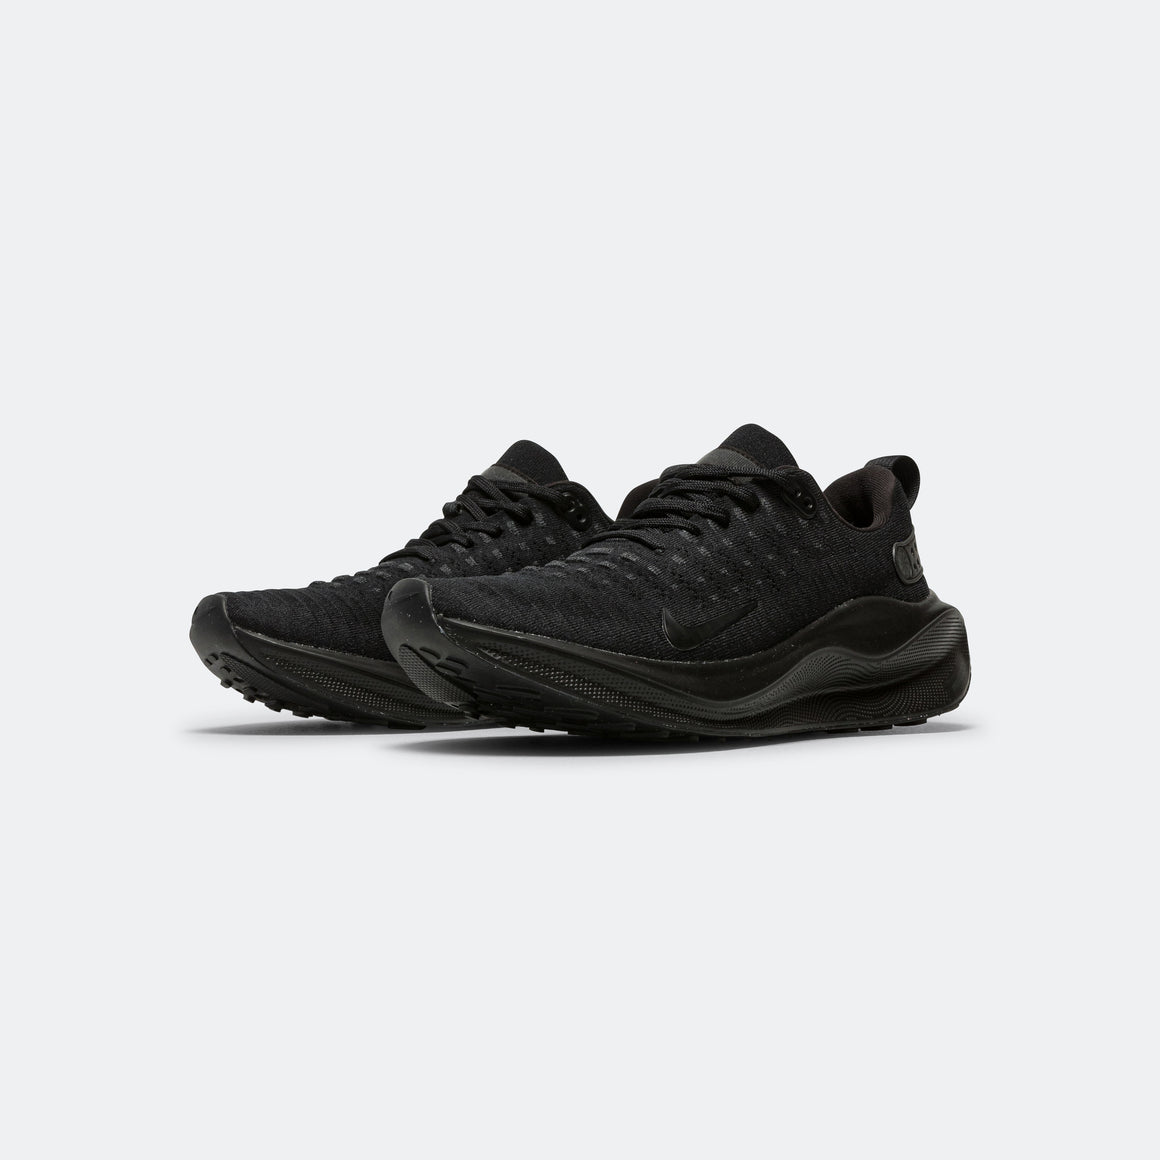 Nike - Womens ReactX Infinity Run 4 - Black/Black-Anthracite - Up There Athletics